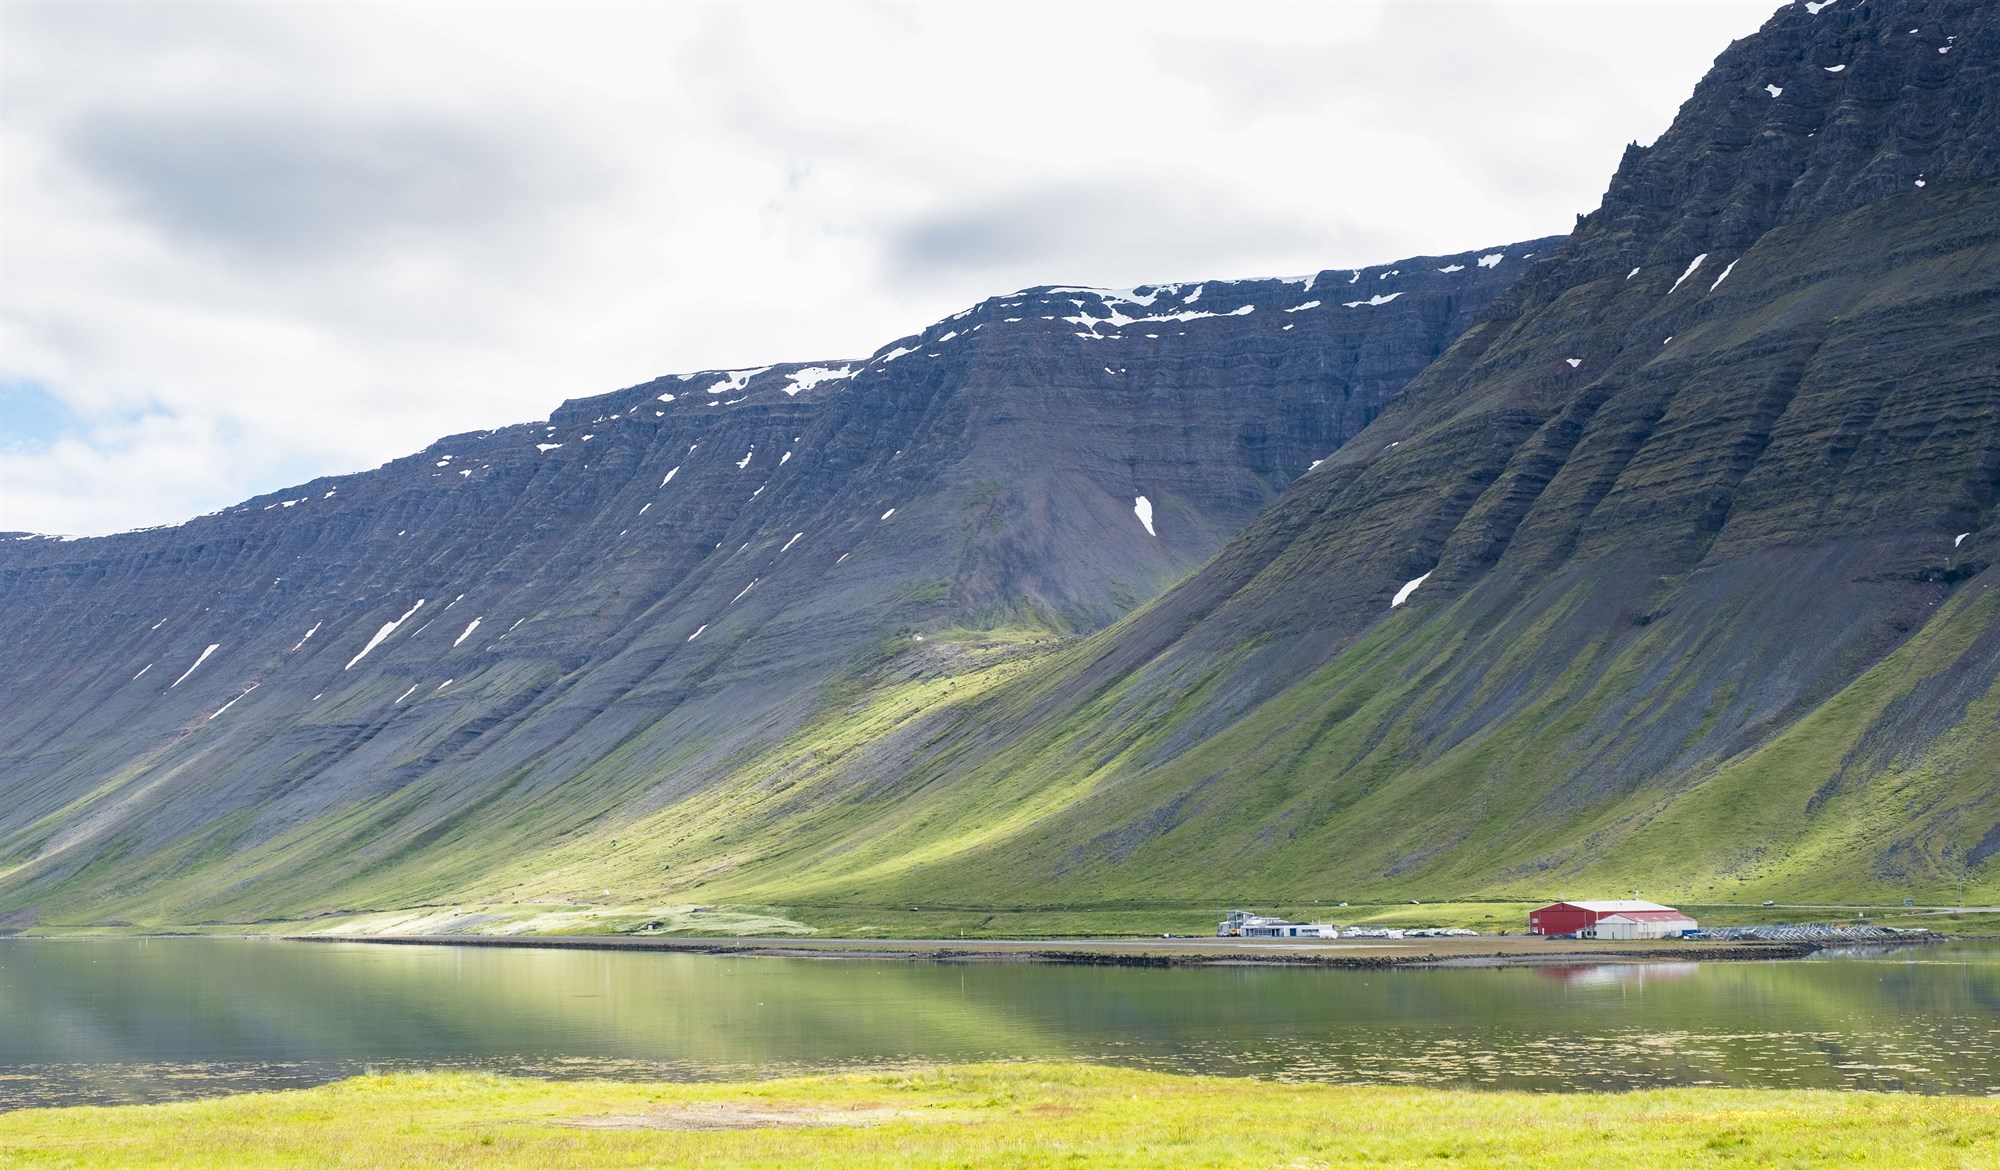 Isafjordur Airport has one of the world‘s most scenic approaches